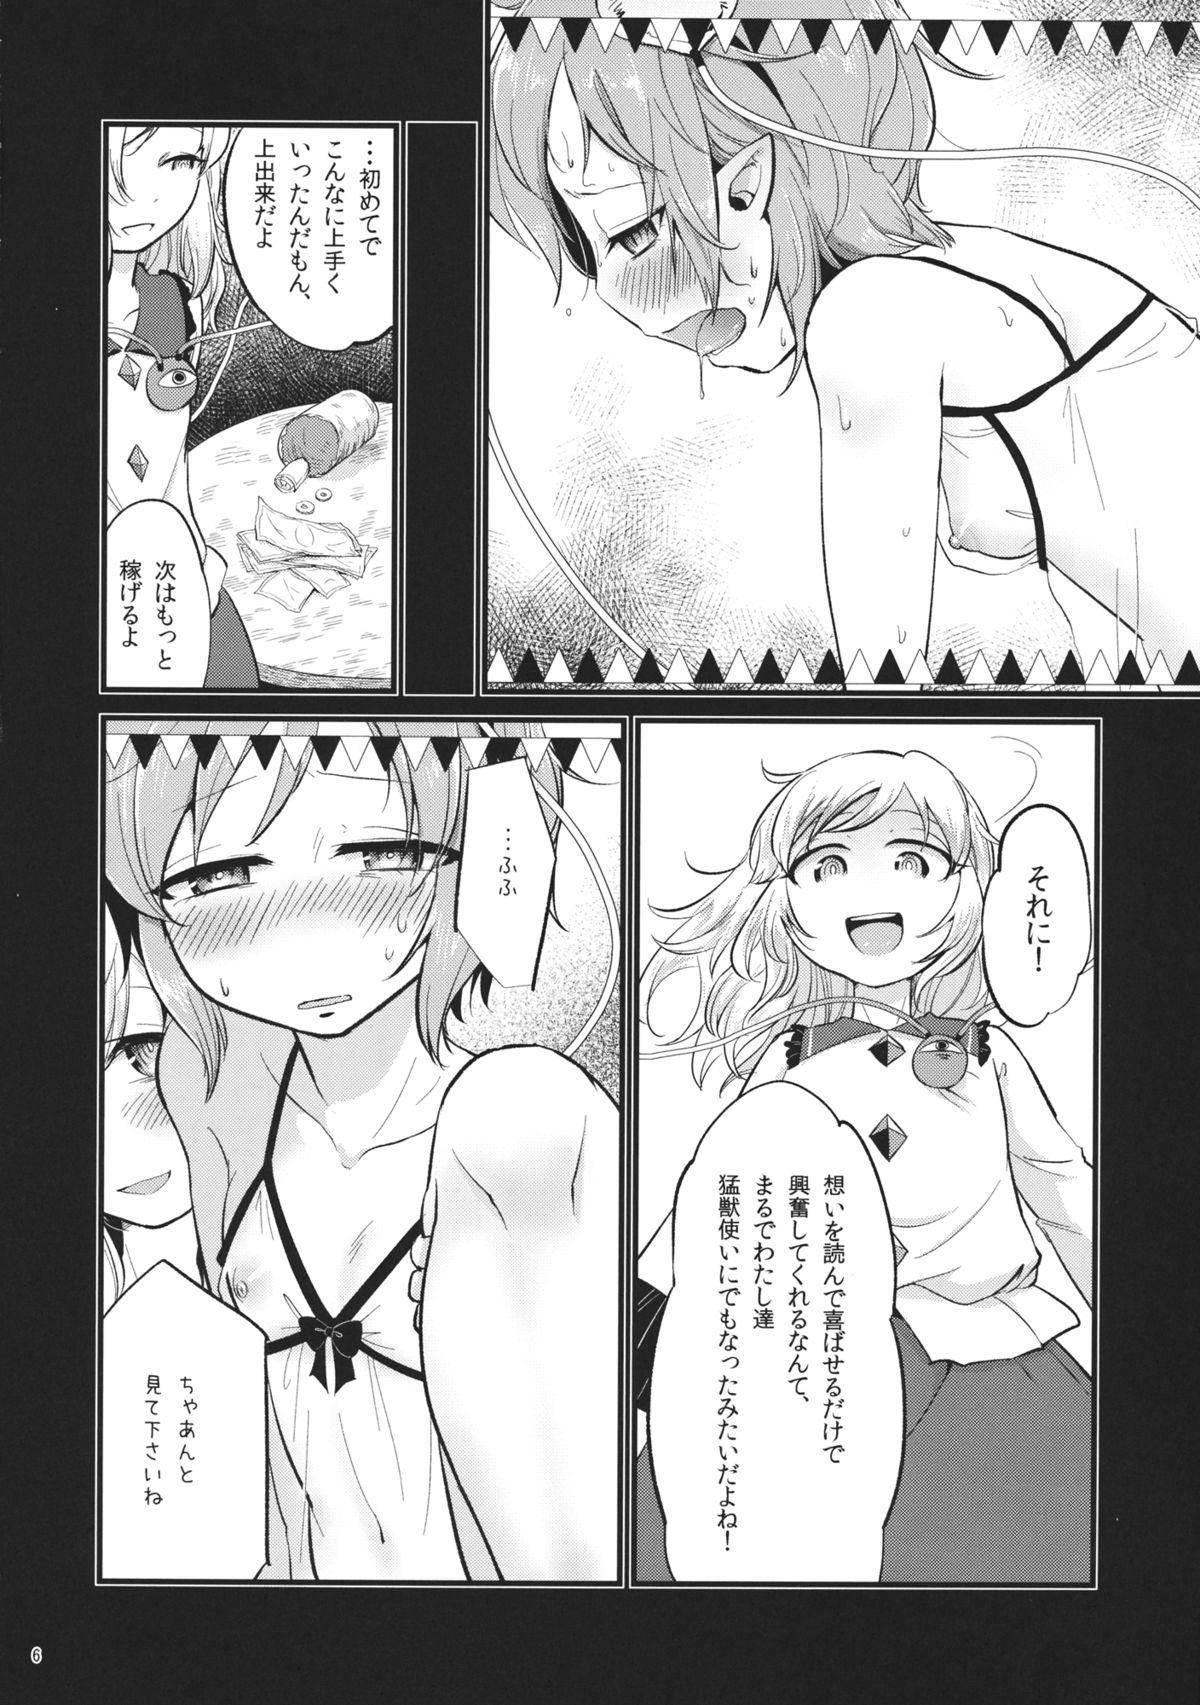 Brunet Aka to Ao no Circus - Touhou project Porn Star - Page 5